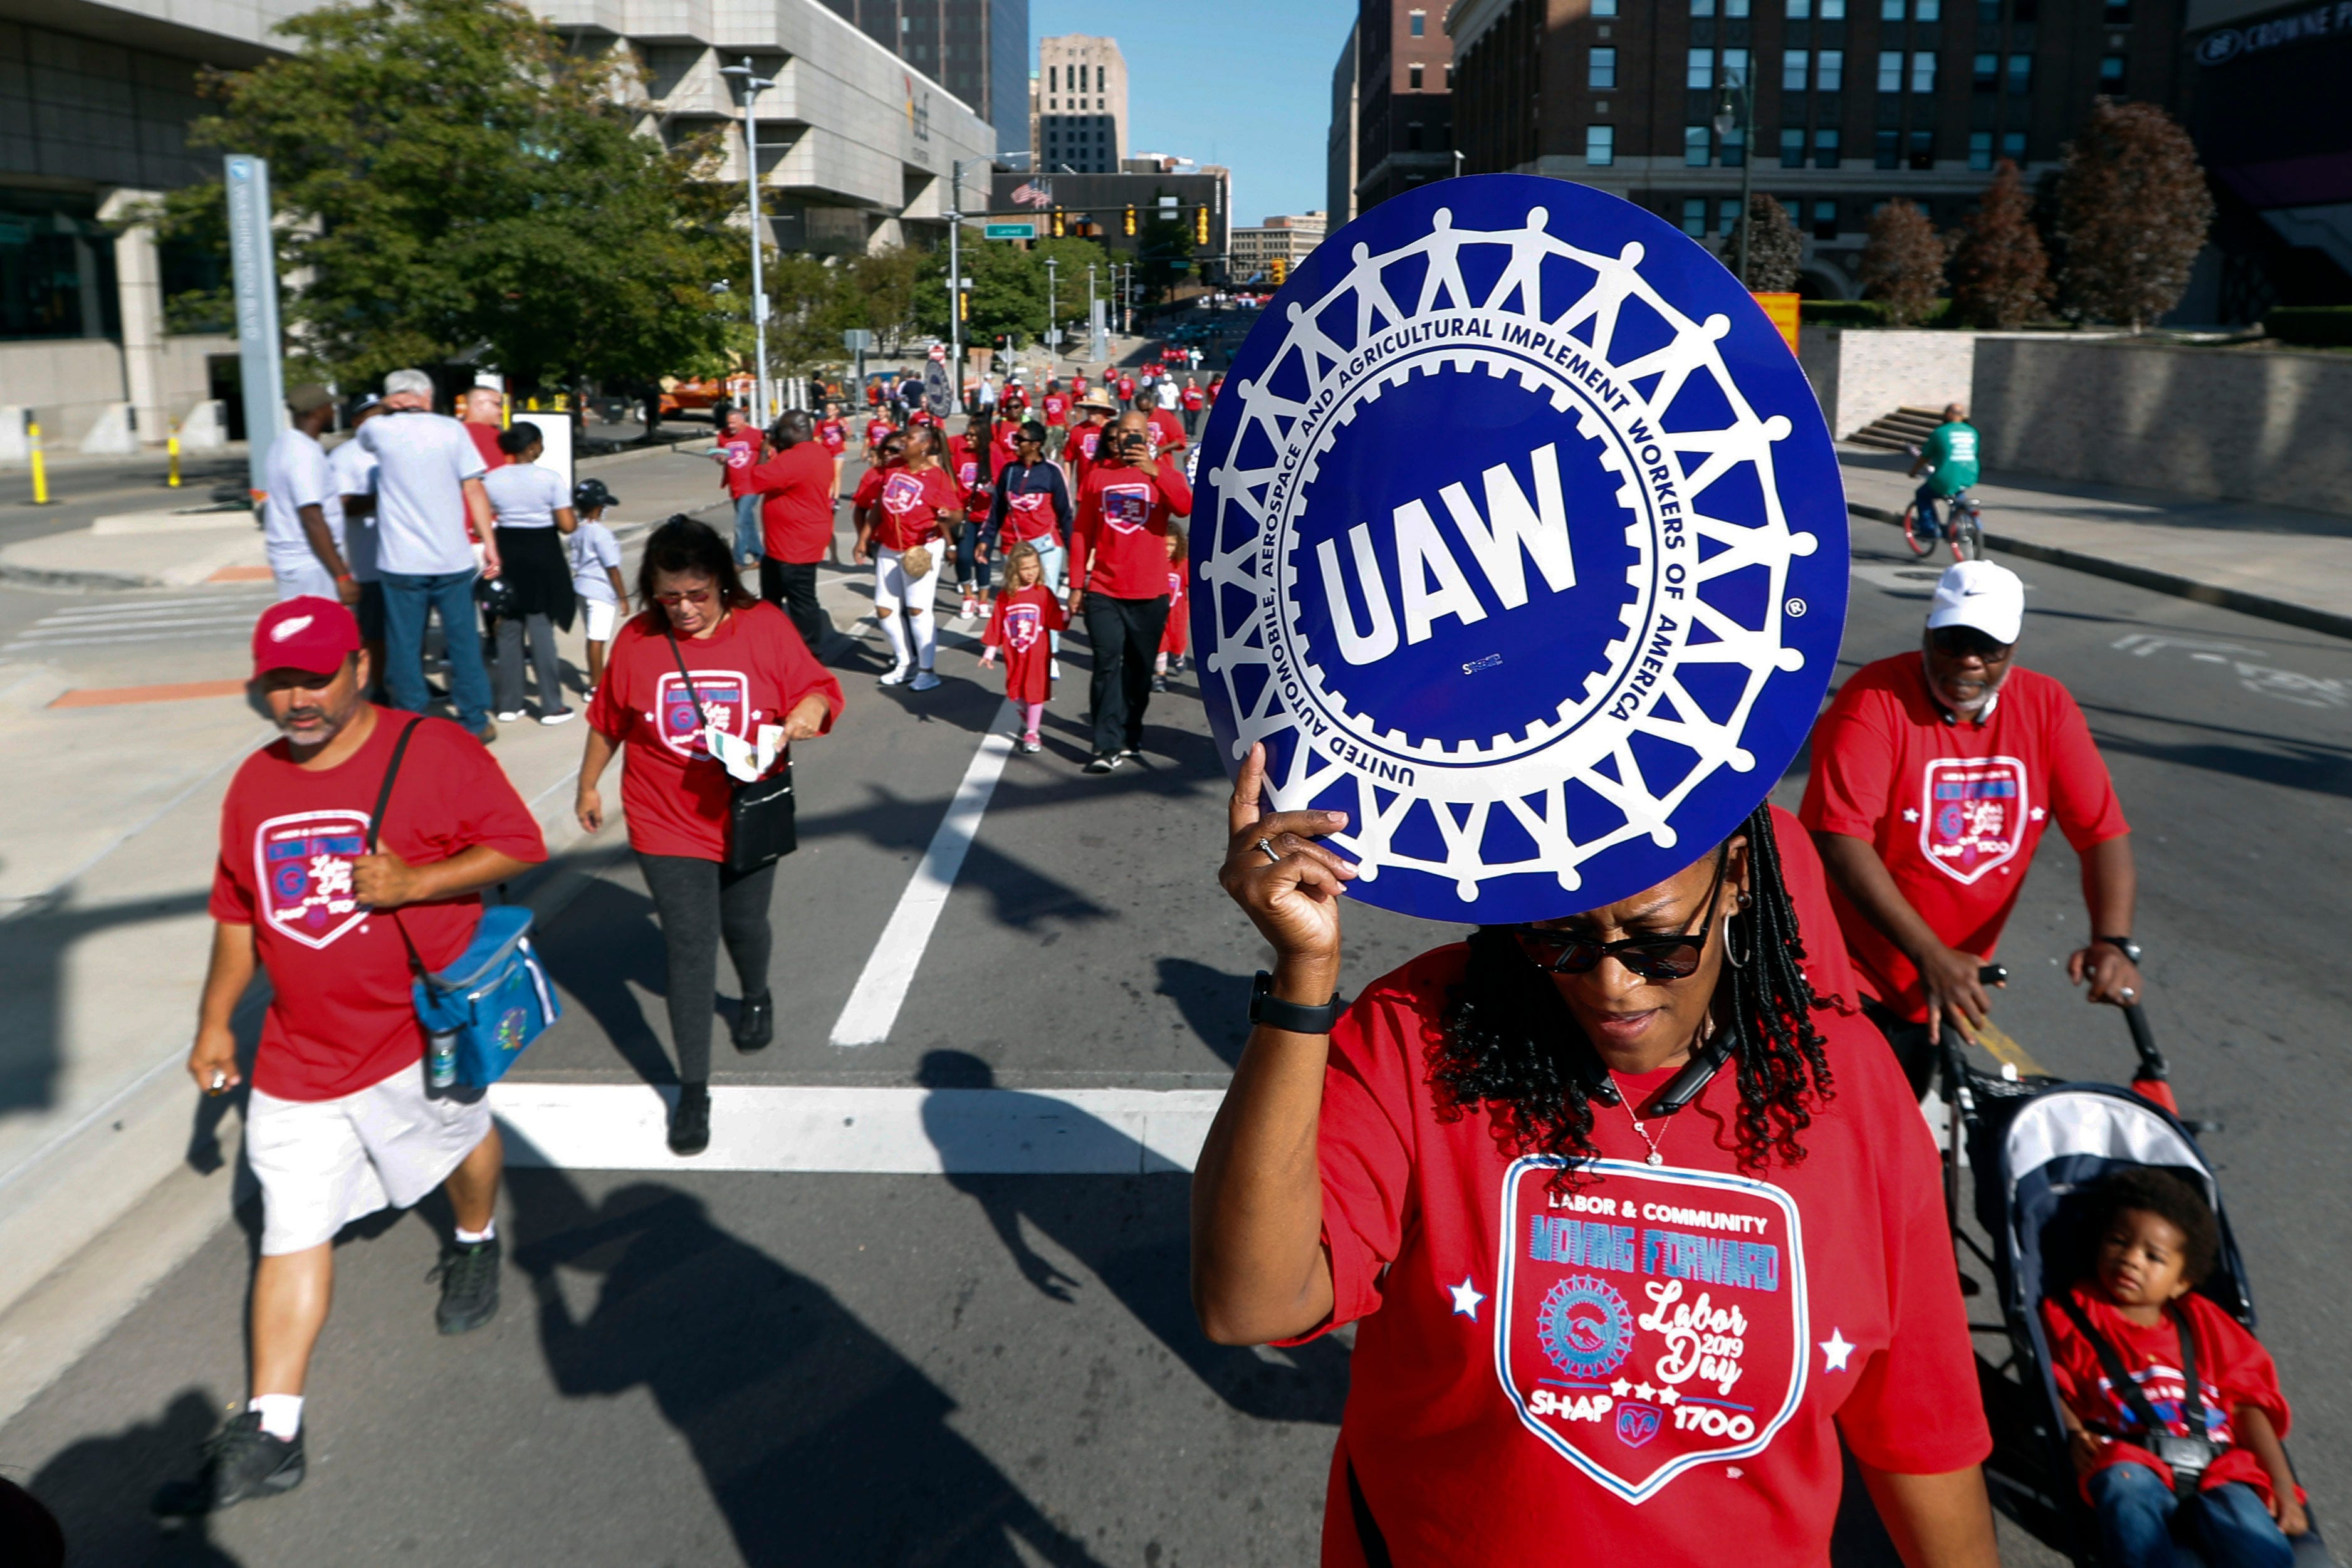 United Auto Workers members walk in the Labor Day parade in Detroit, Monday, Sept. 2, 2019. (AP Photo/Paul Sancya)